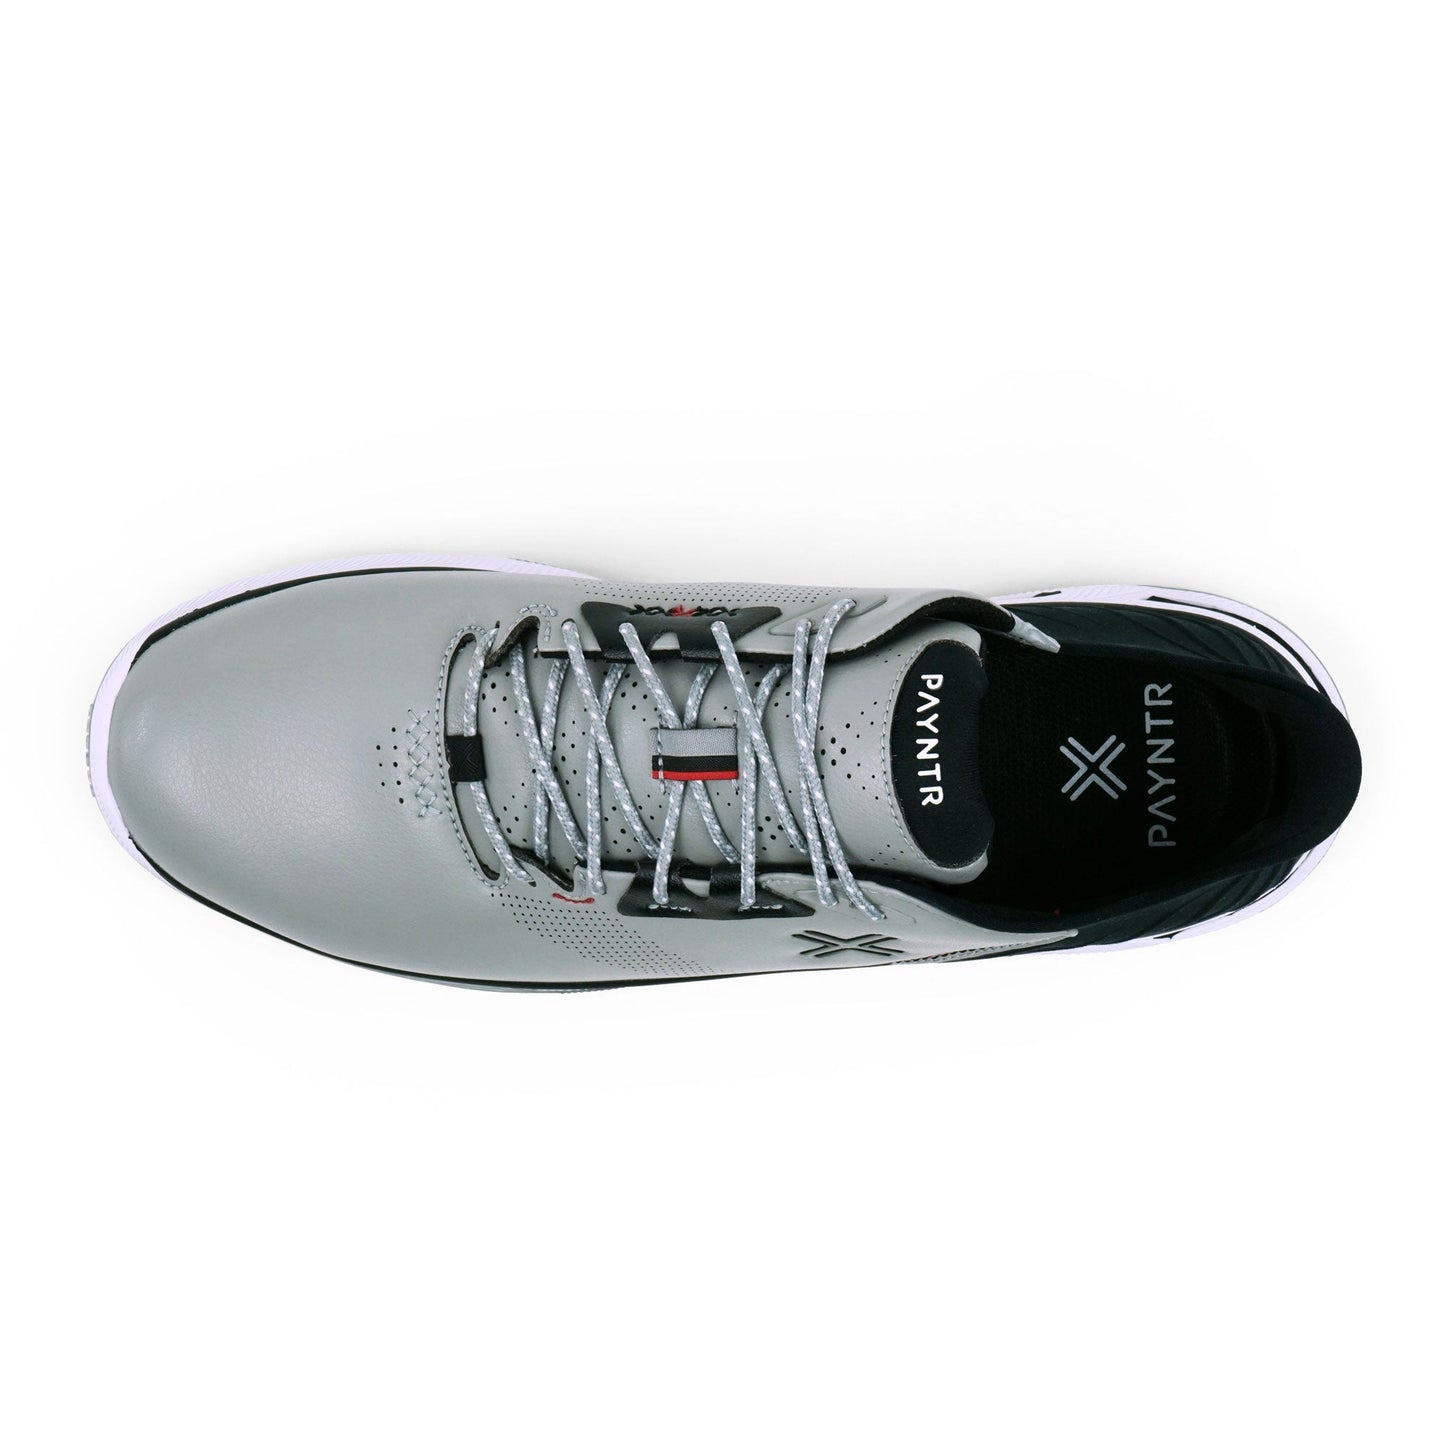 PAYNTR X-004 RS Spiked Golf Shoe (Grey/Black) - Top